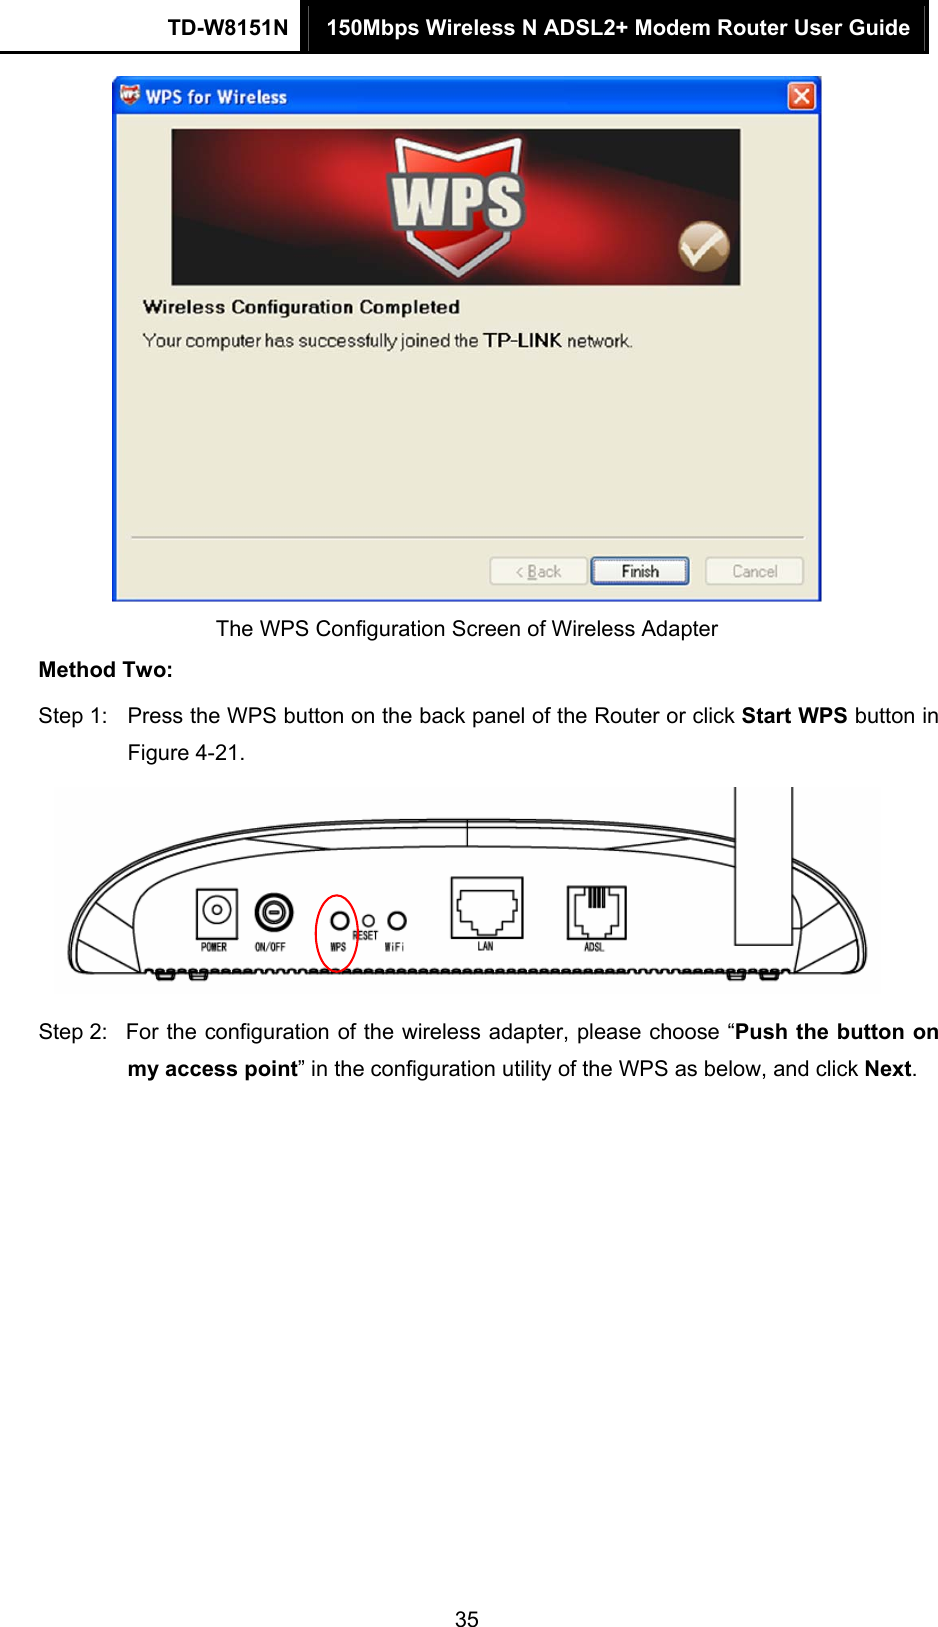 TD-W8151N  150Mbps Wireless N ADSL2+ Modem Router User Guide  35 The WPS Configuration Screen of Wireless Adapter   Method Two: Step 1:  Press the WPS button on the back panel of the Router or click Start WPS button in Figure 4-21.  Step 2:  For the configuration of the wireless adapter, please choose “Push the button on my access point” in the configuration utility of the WPS as below, and click Next.  